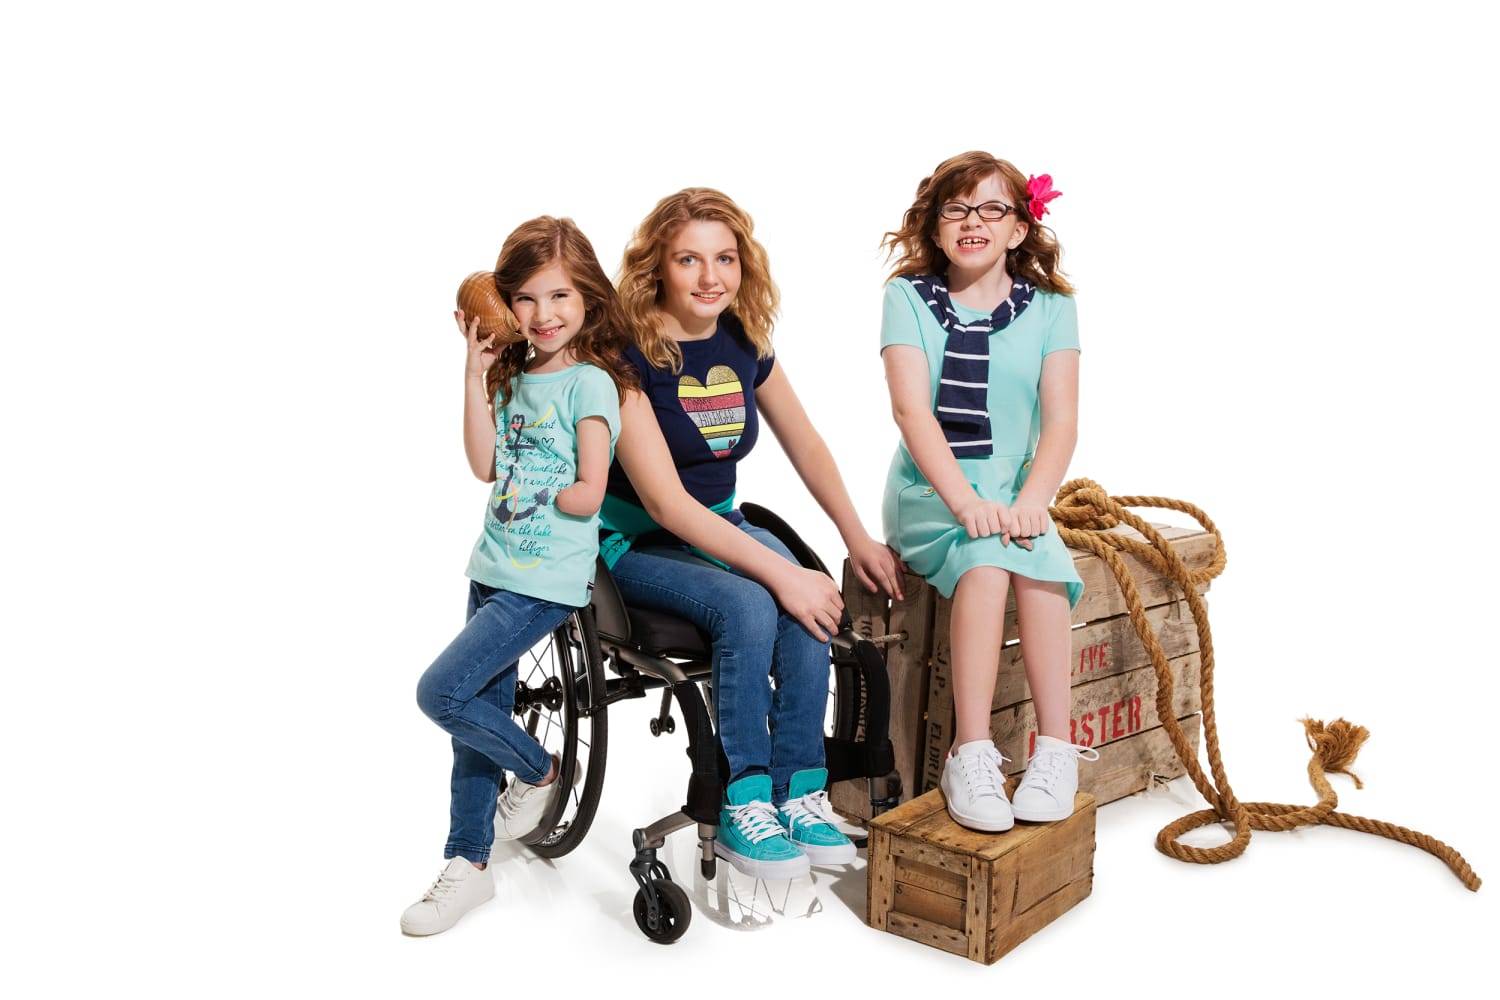 stempel Brød Disciplin Tommy Hilfiger launches 'inclusive' clothing line for kids with disabilities